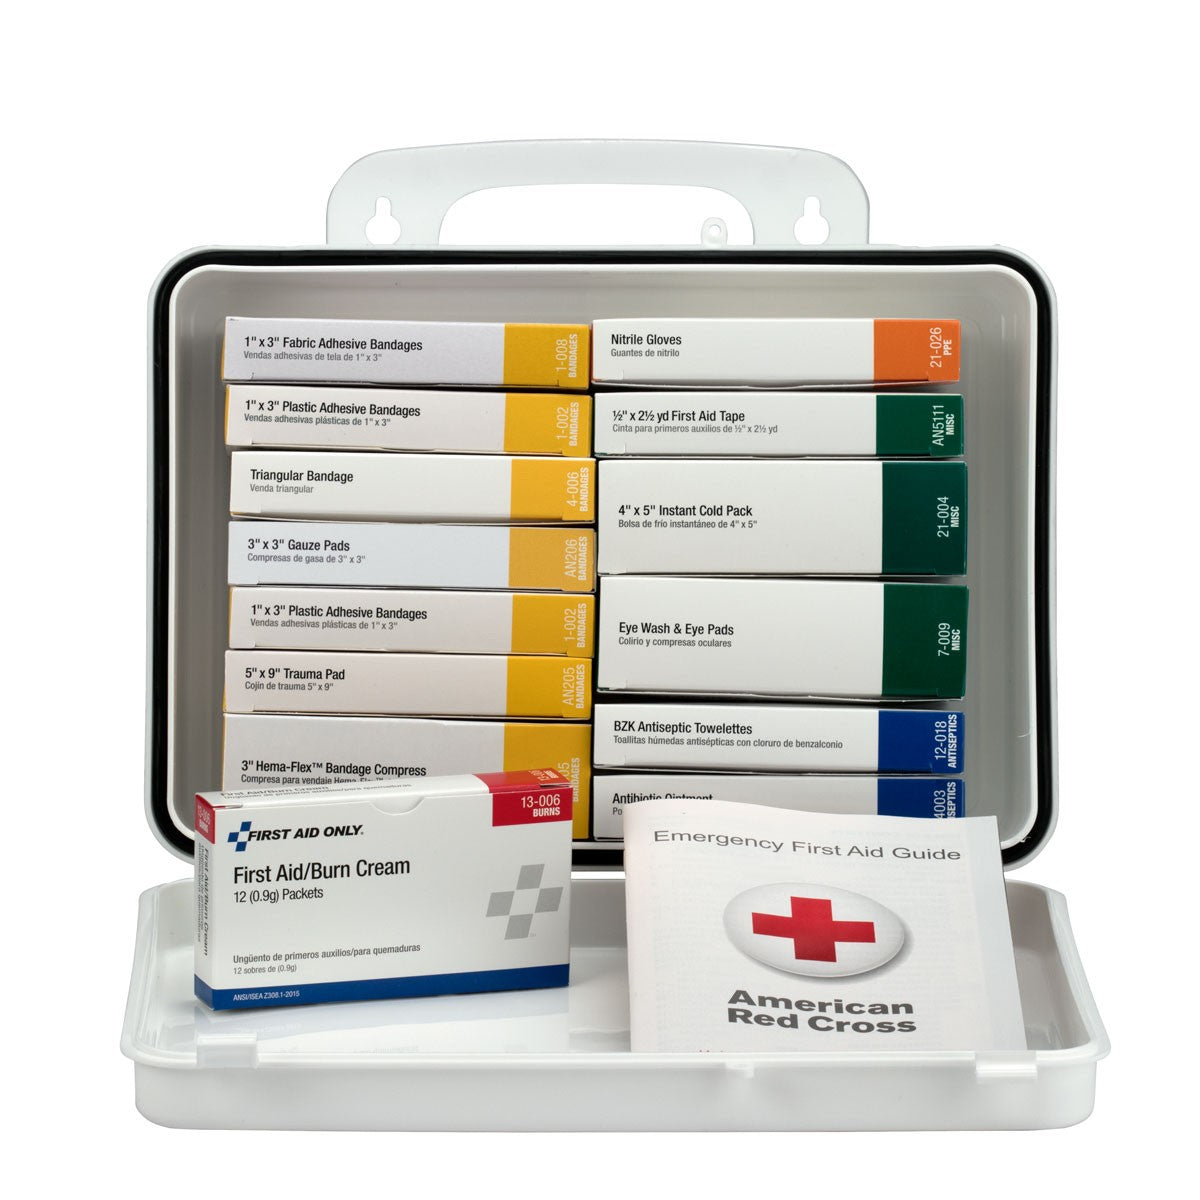 25 Person Unitized Plastic First Aid Kit, OSHA Compliant - W-239-AN